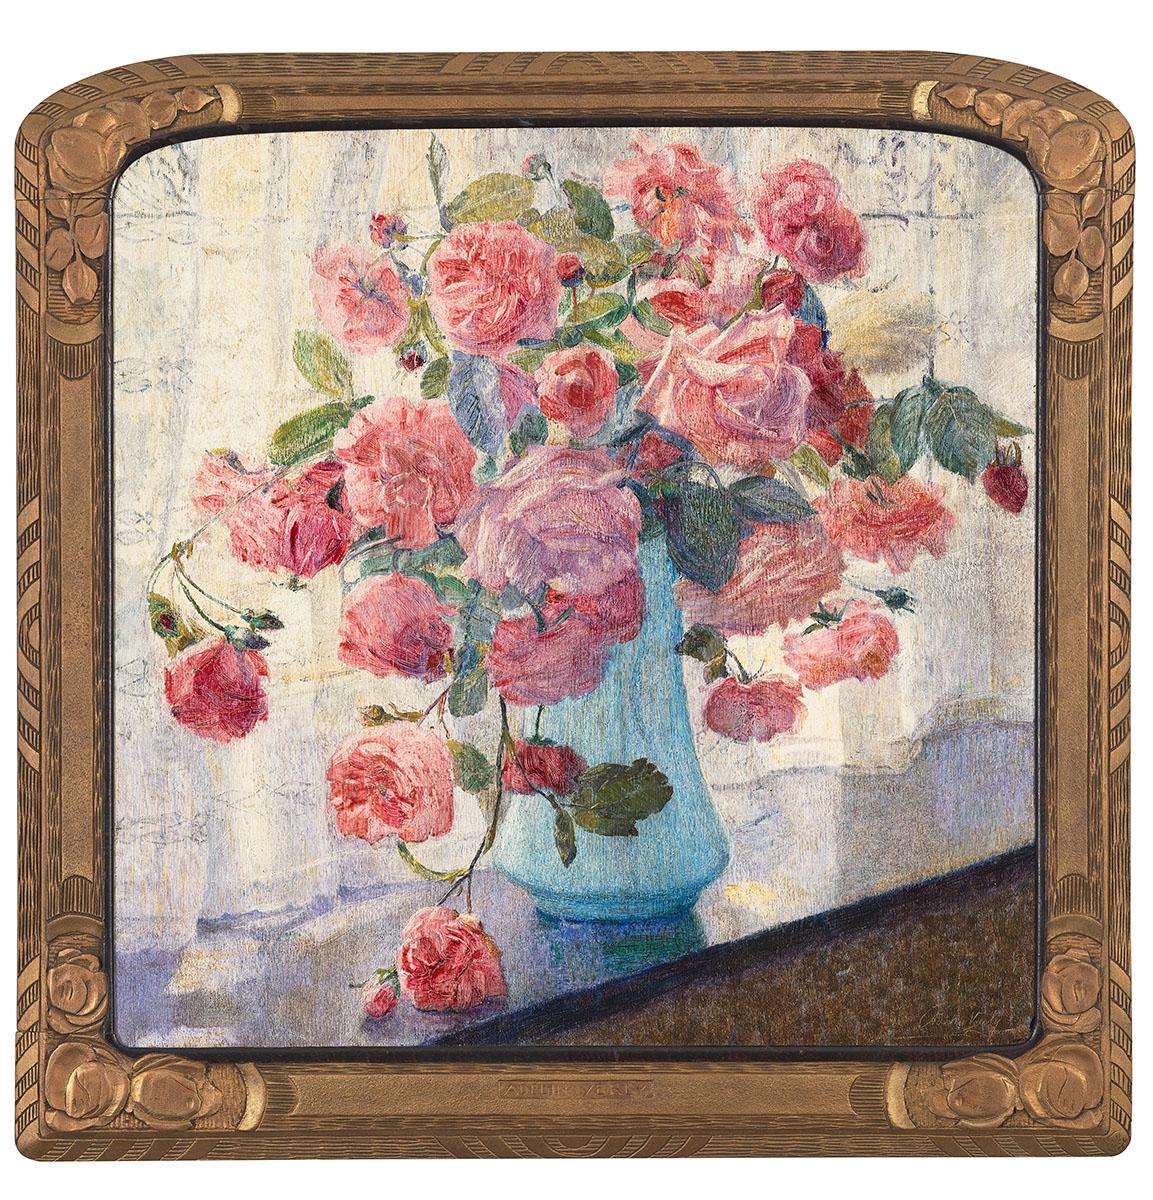 ADELIN VERLY
Brussels 1883-1967

STILL LIFE WITH ROSES

Triplex 
54 x 54 cm.
Signed: lower right 'Adelin Verly'

Provenance: Private collection, The Netherlands